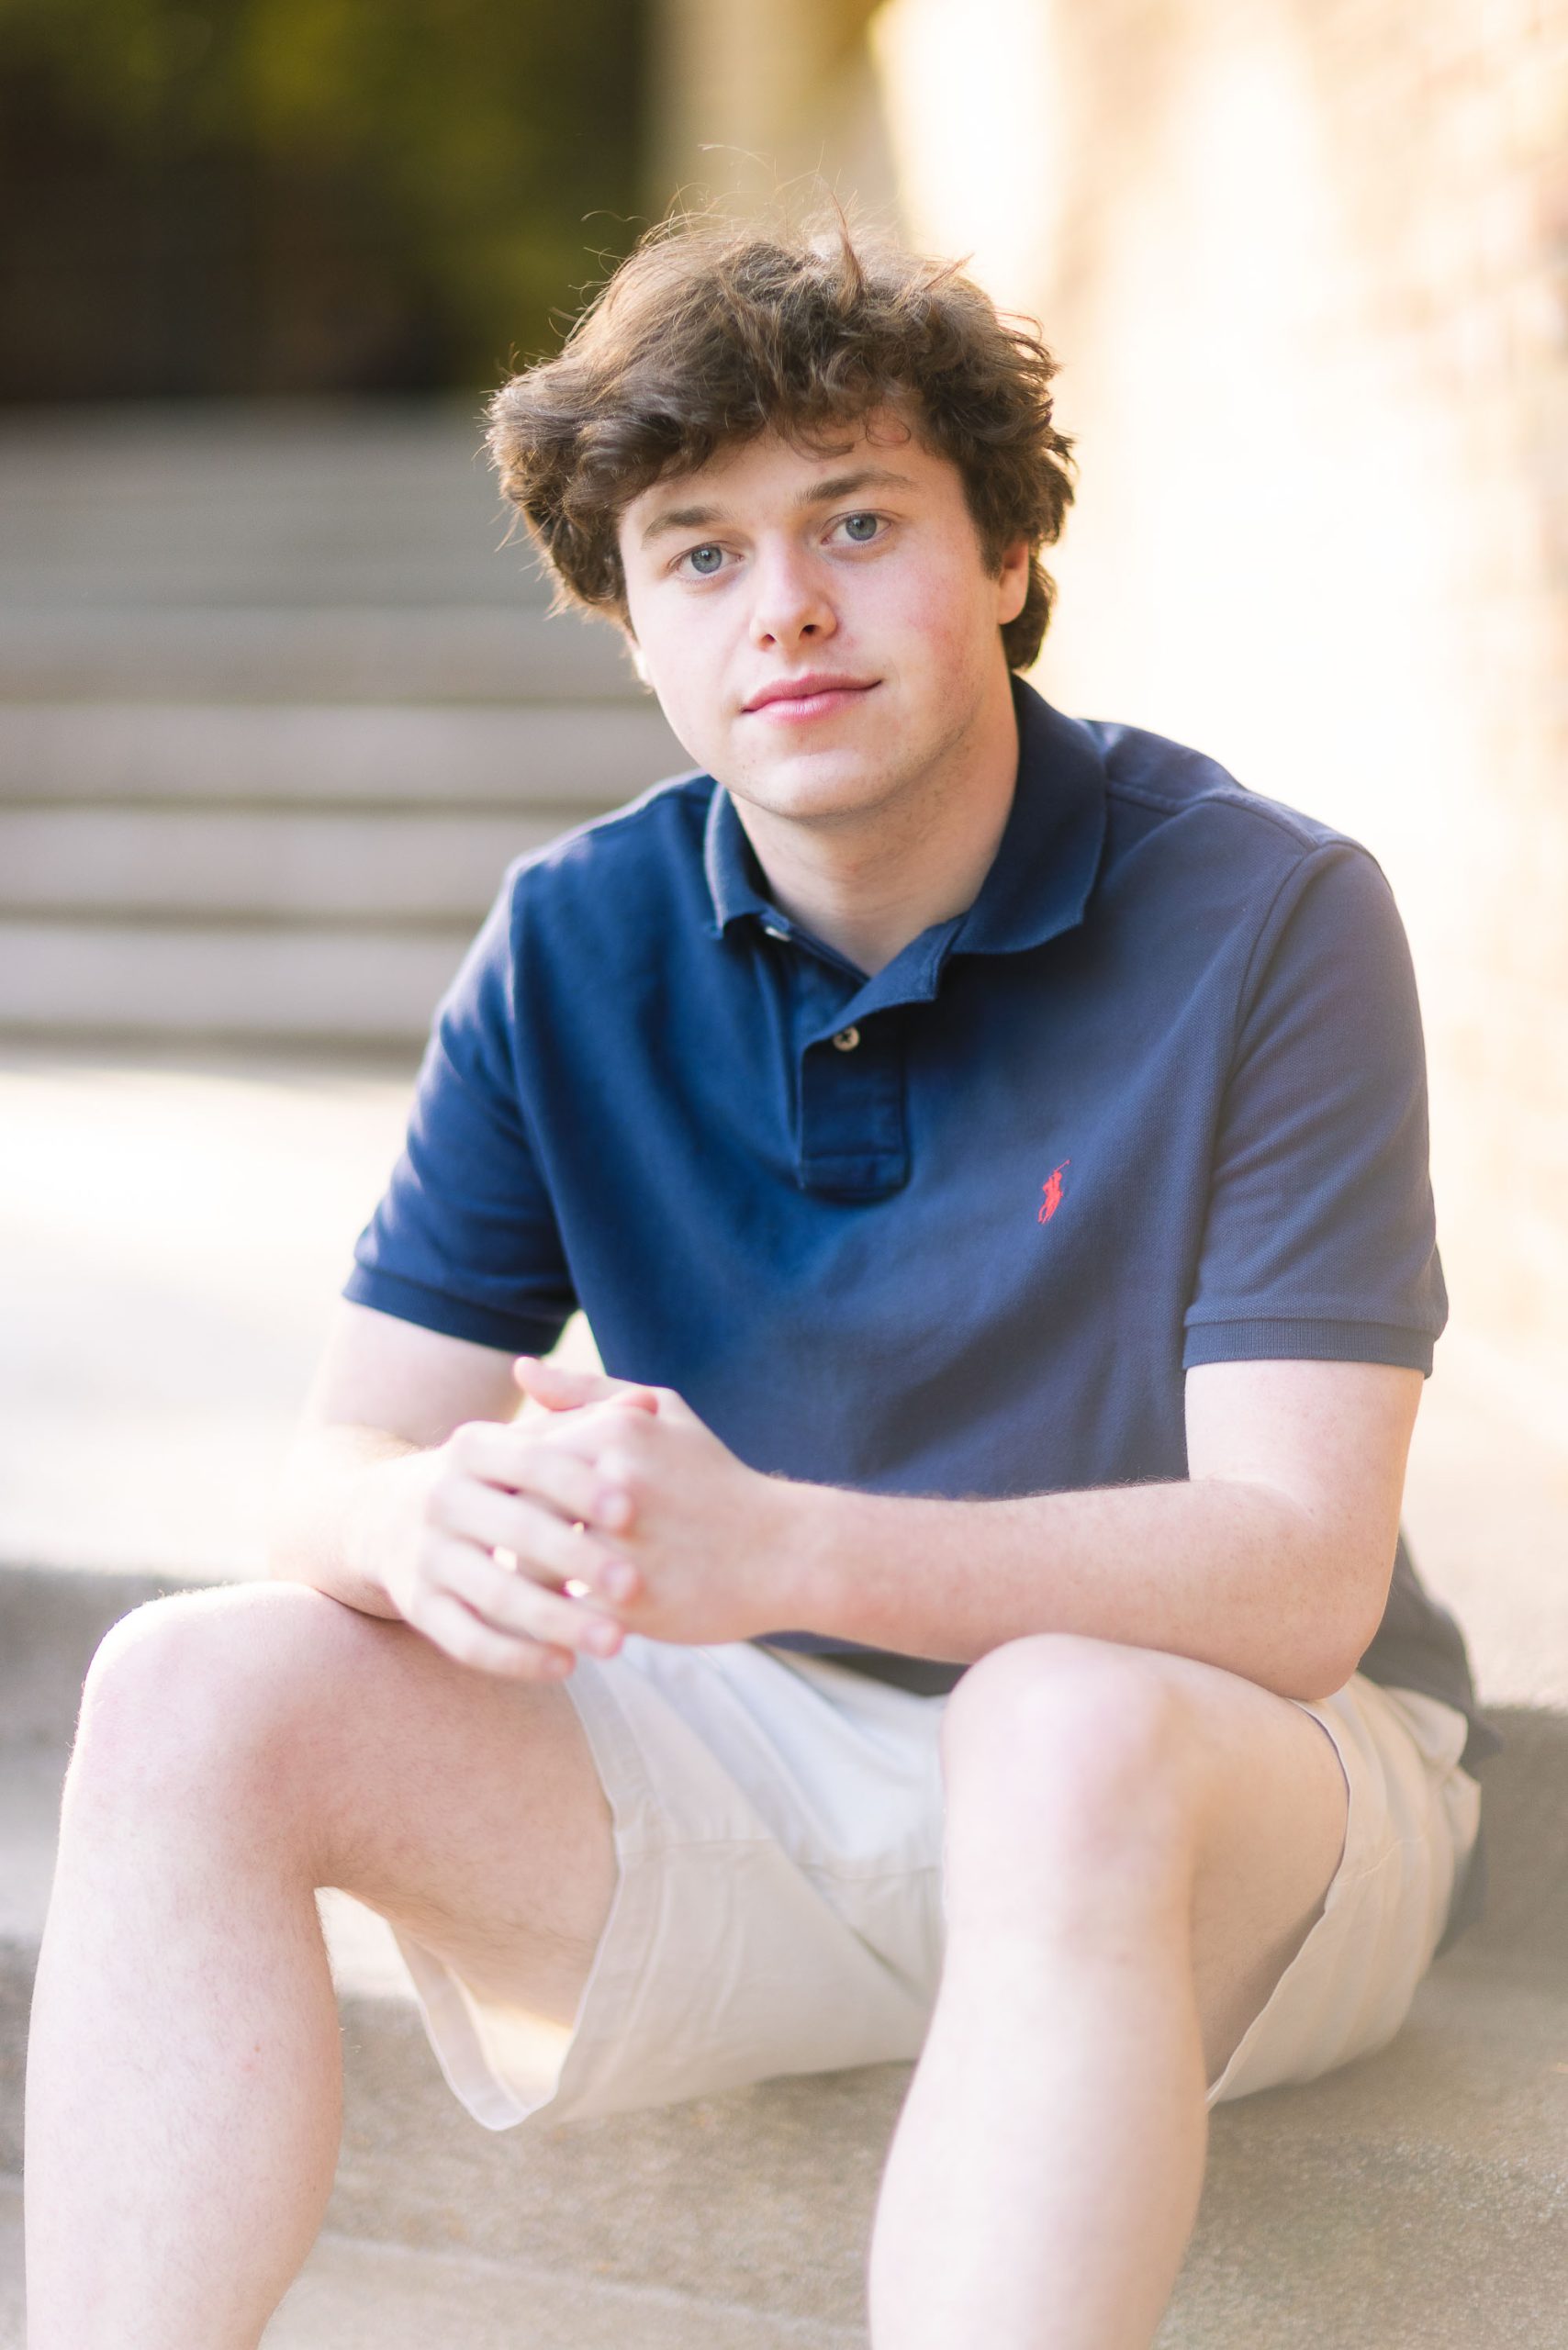 A young man in a blue shirt sitting on steps, captured in a graduation portrait.